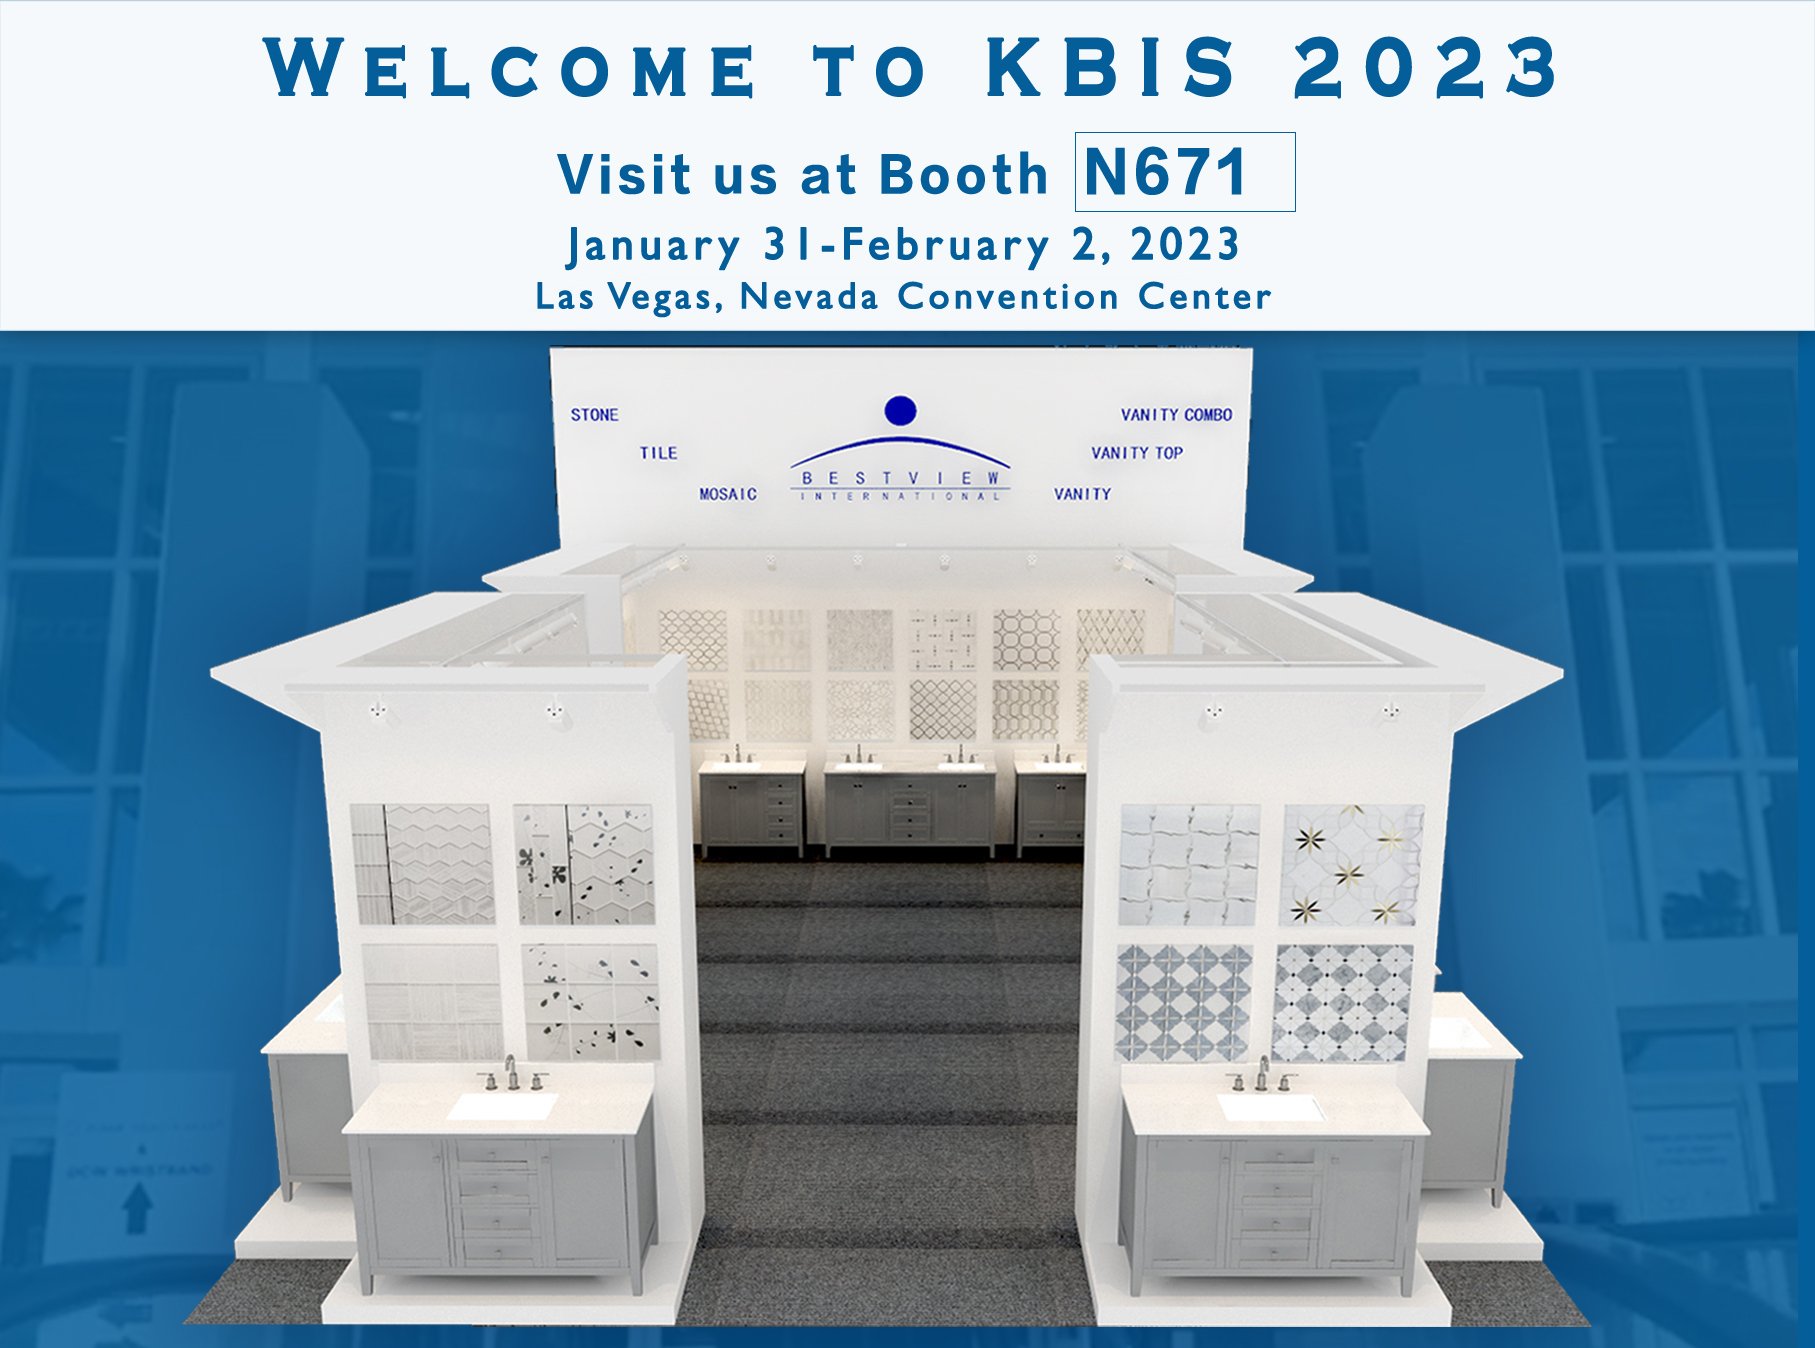 KBIS 2023 in the Las Vegas, Nevada Convention Center